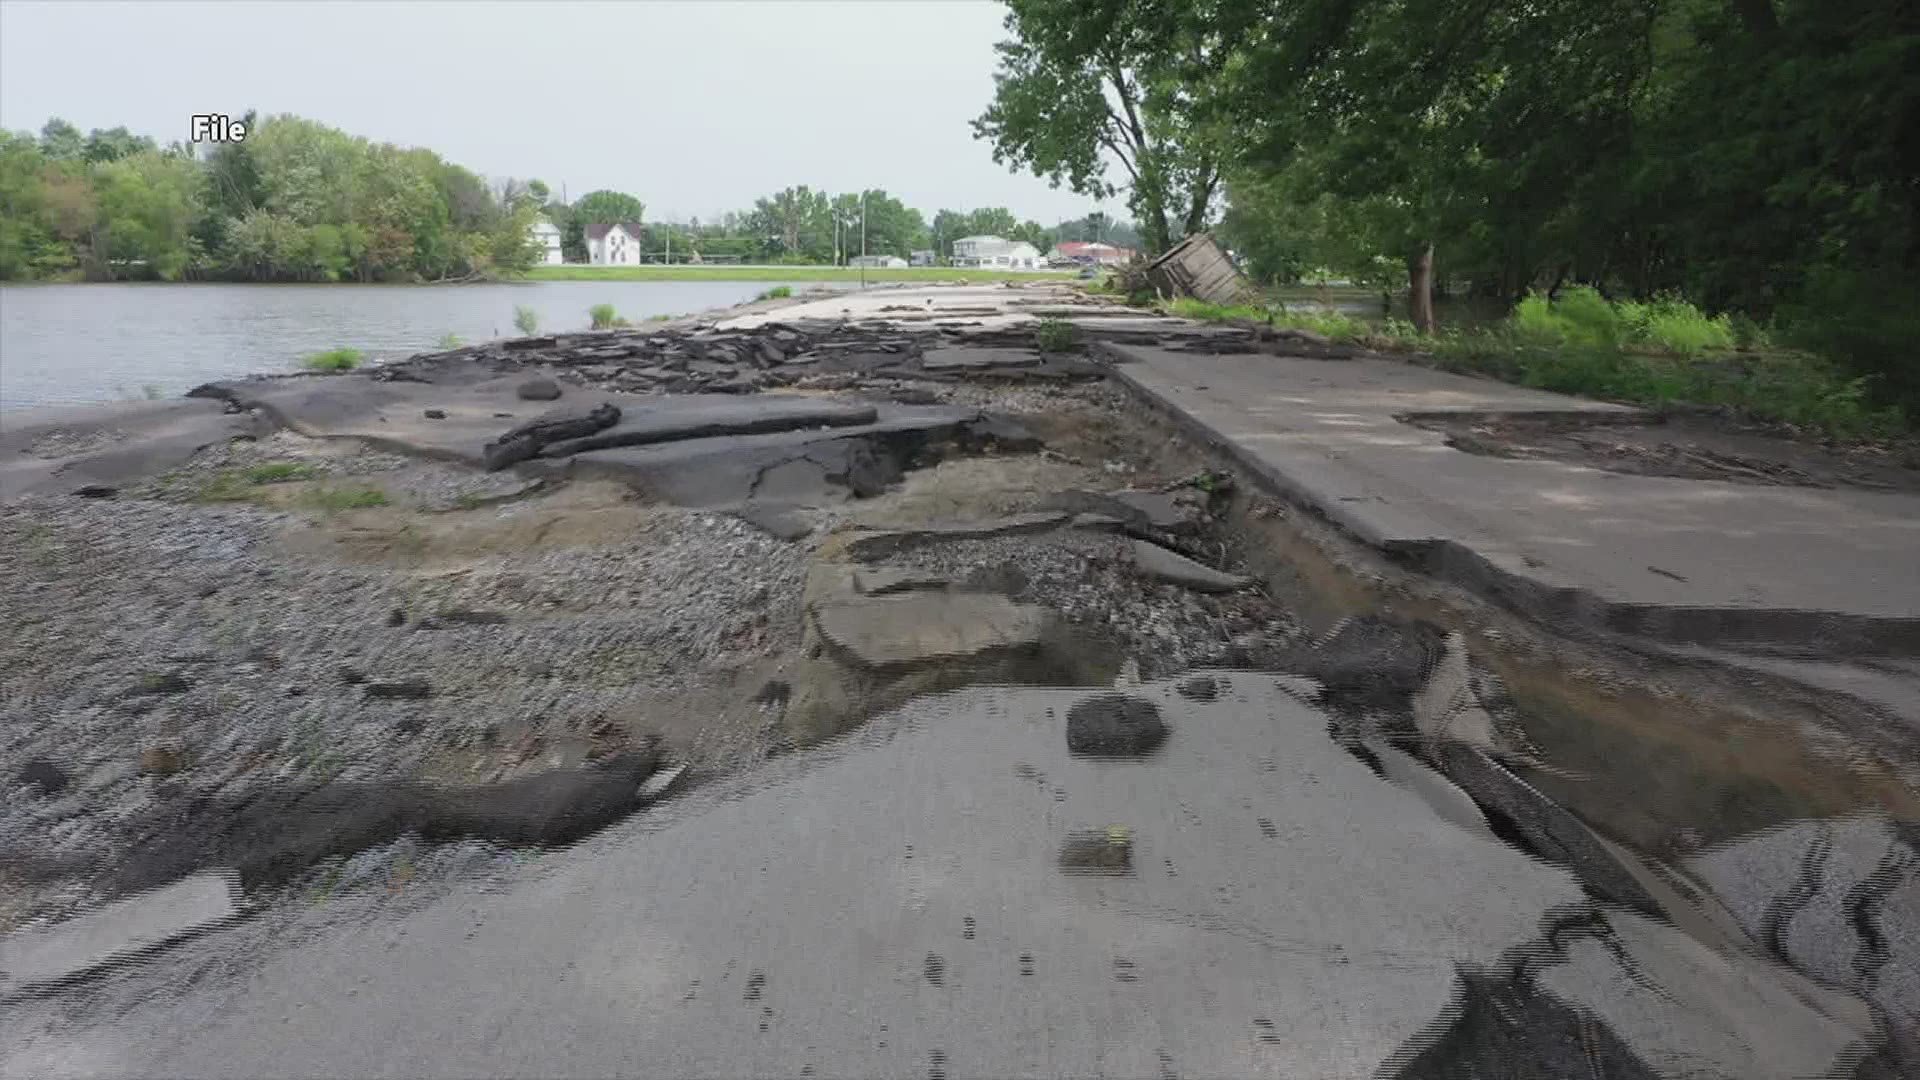 Crews will begin repairs on the road leading into Credit Island Park the week of June 28. The project is expected to be completed by mid-August.